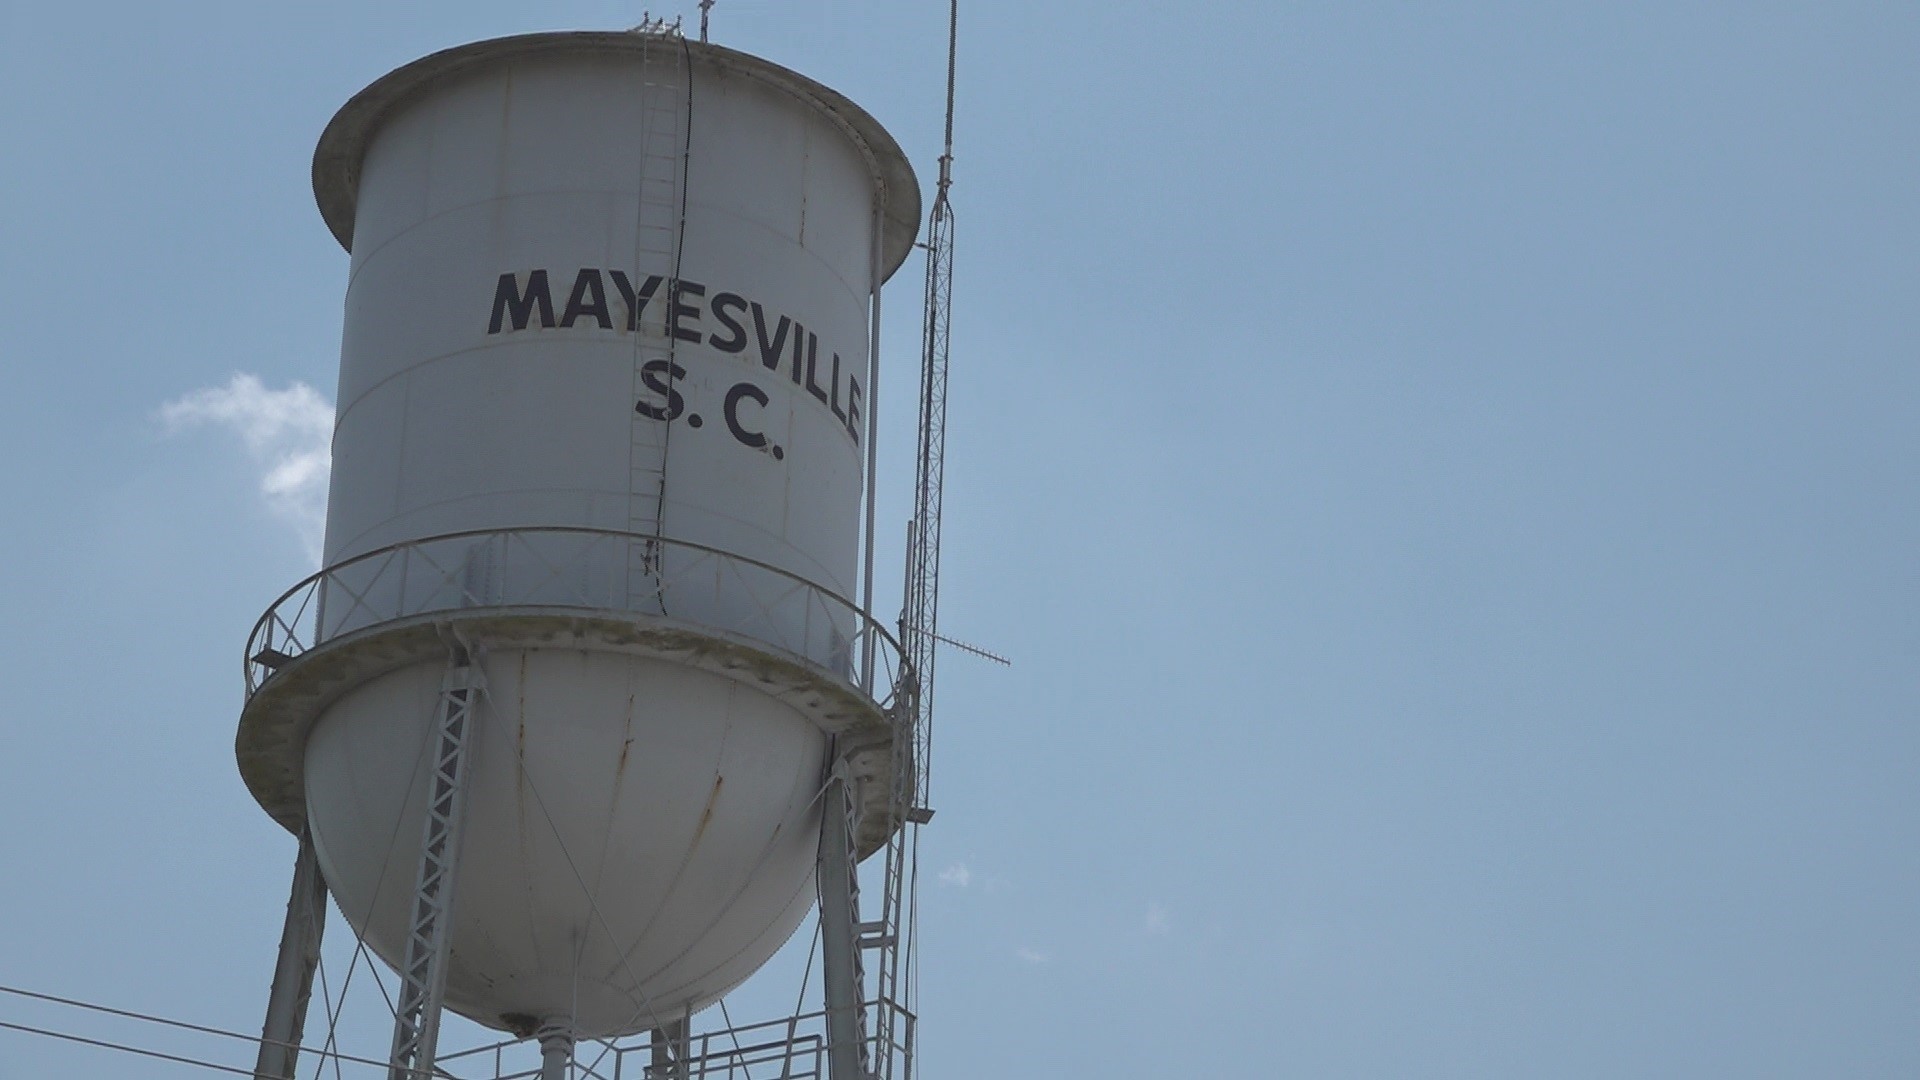 Mayesville was a thriving town and the mayor hopes to bring back some of that back by making it a tourist town.